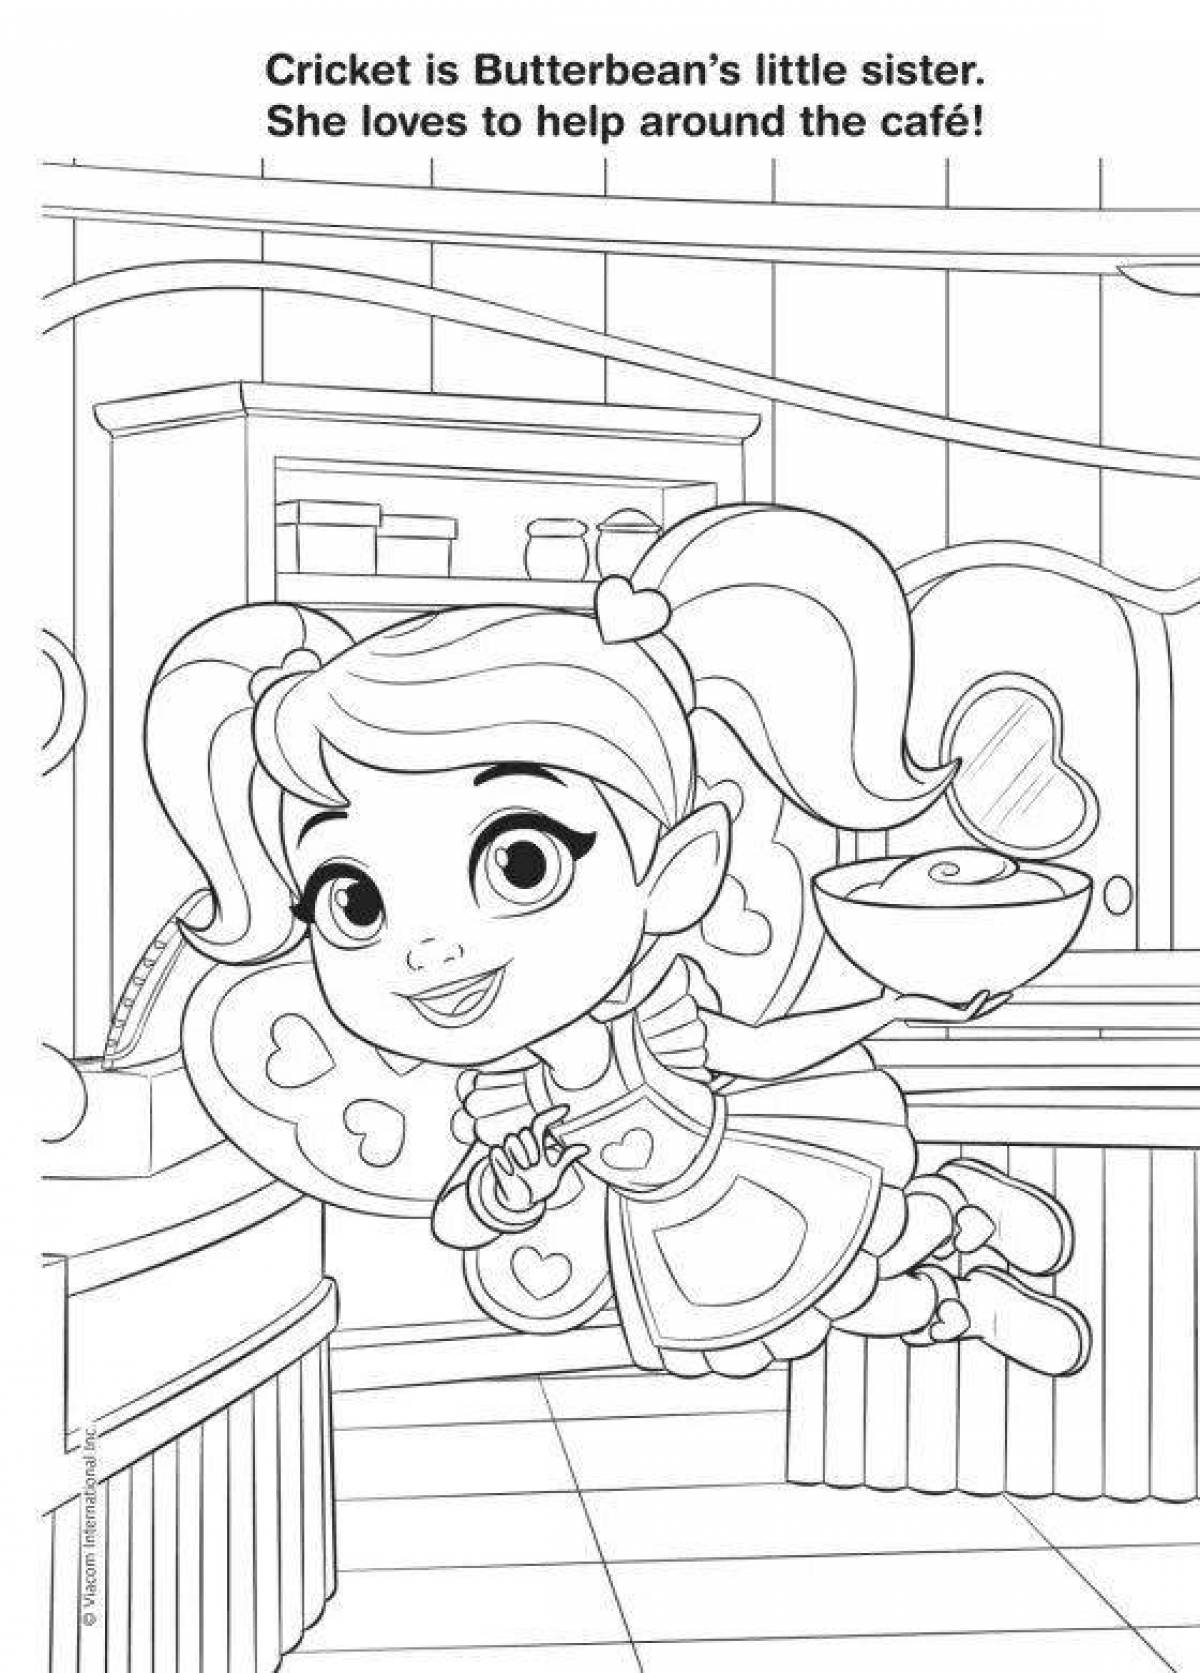 Cafe butter bean coloring page